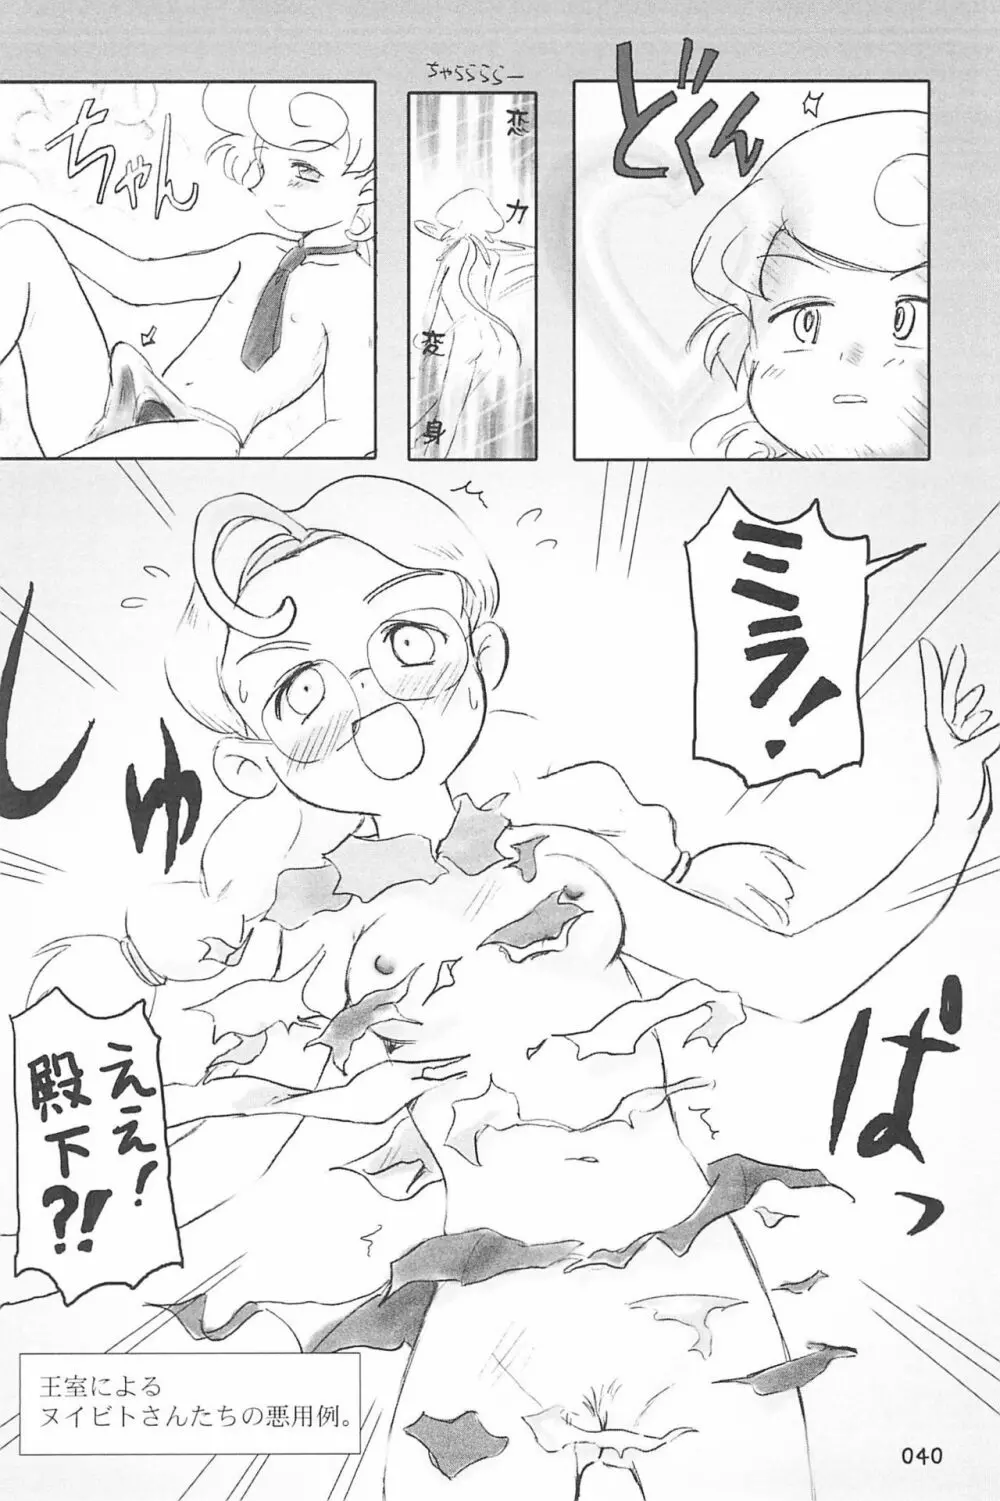 ND-special Volume 4 40ページ